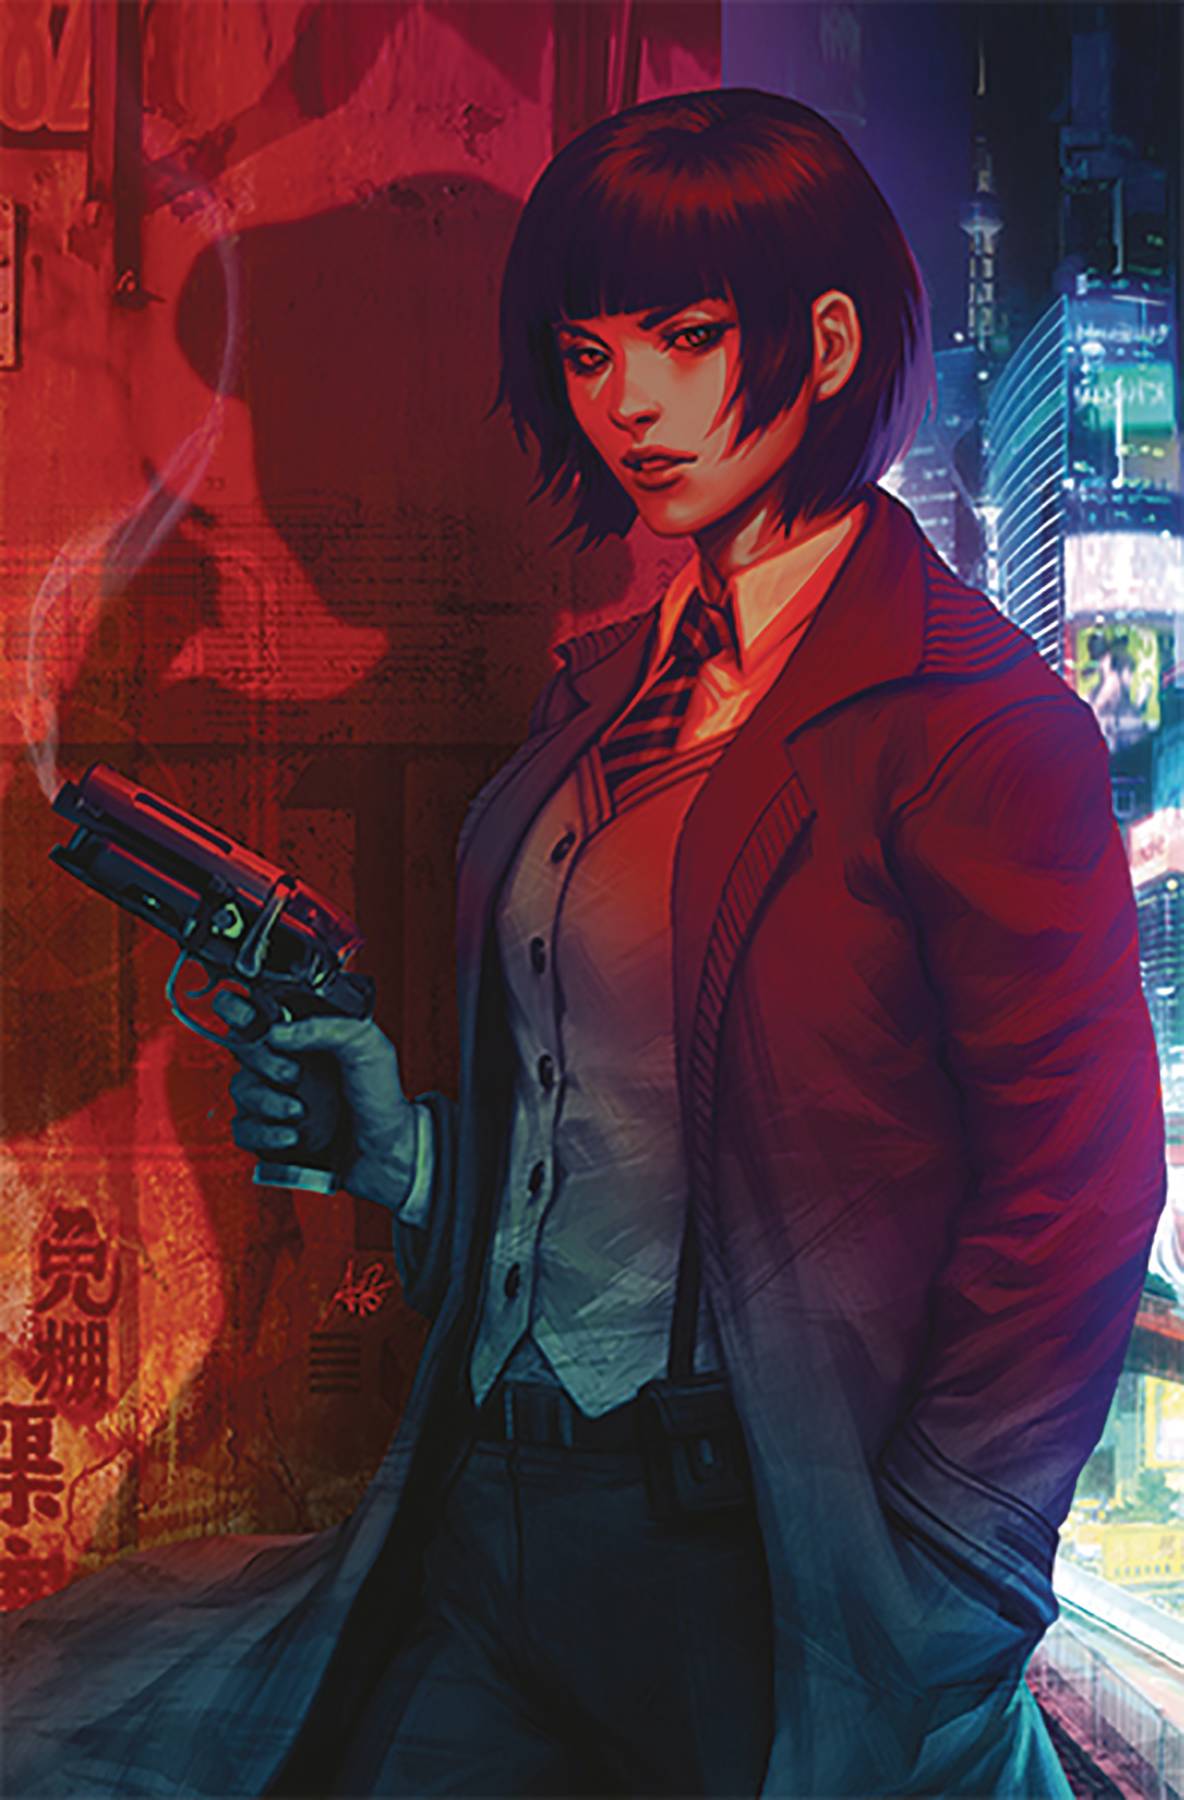 Blade Runner 2019 #1 San Diego ComicCon 2019 Variant Cover (Mature)